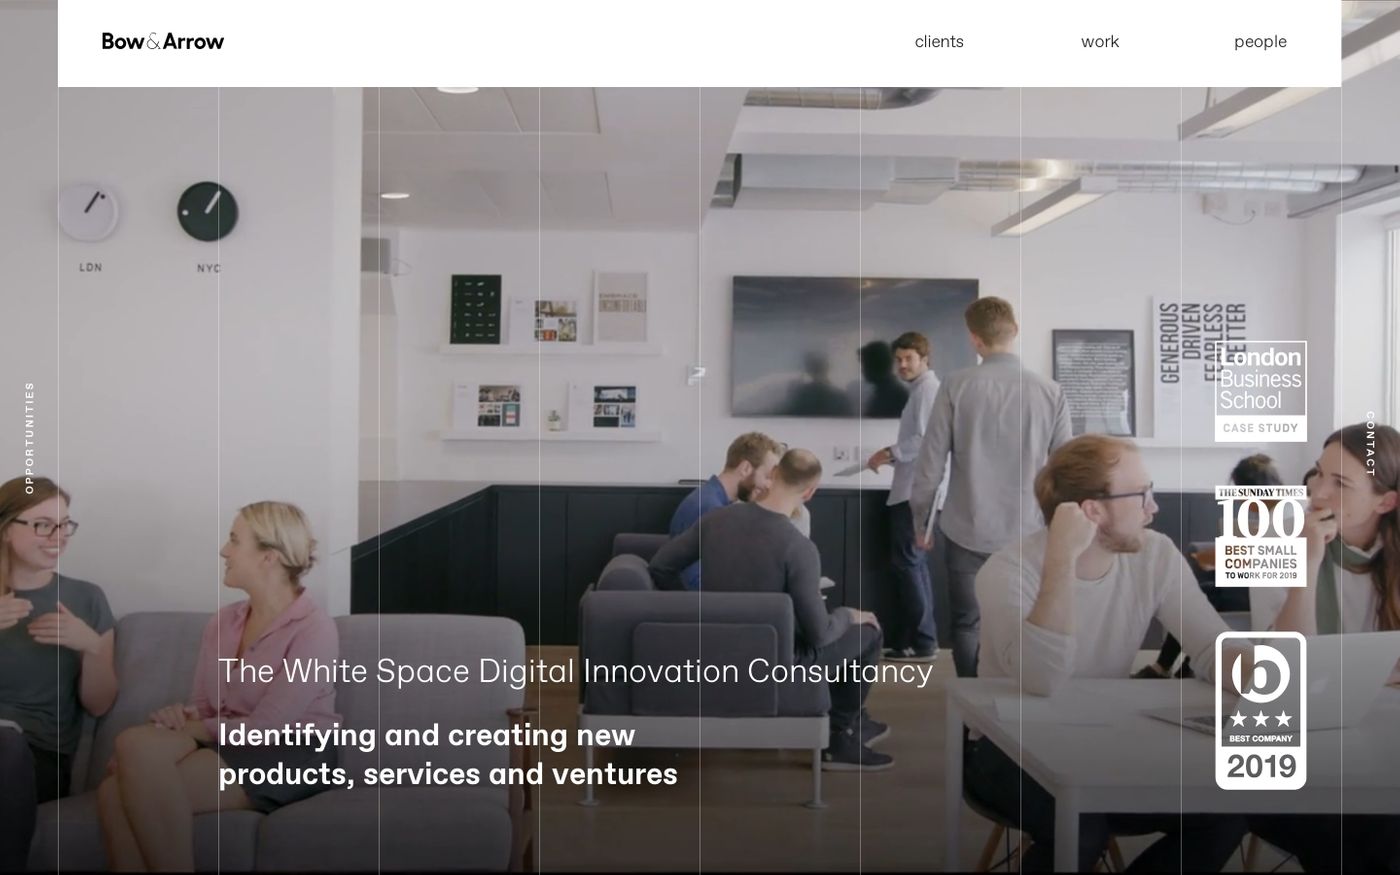 Screenshot of Bow & Arrow | The White Space Digital Innovation Consultancy website